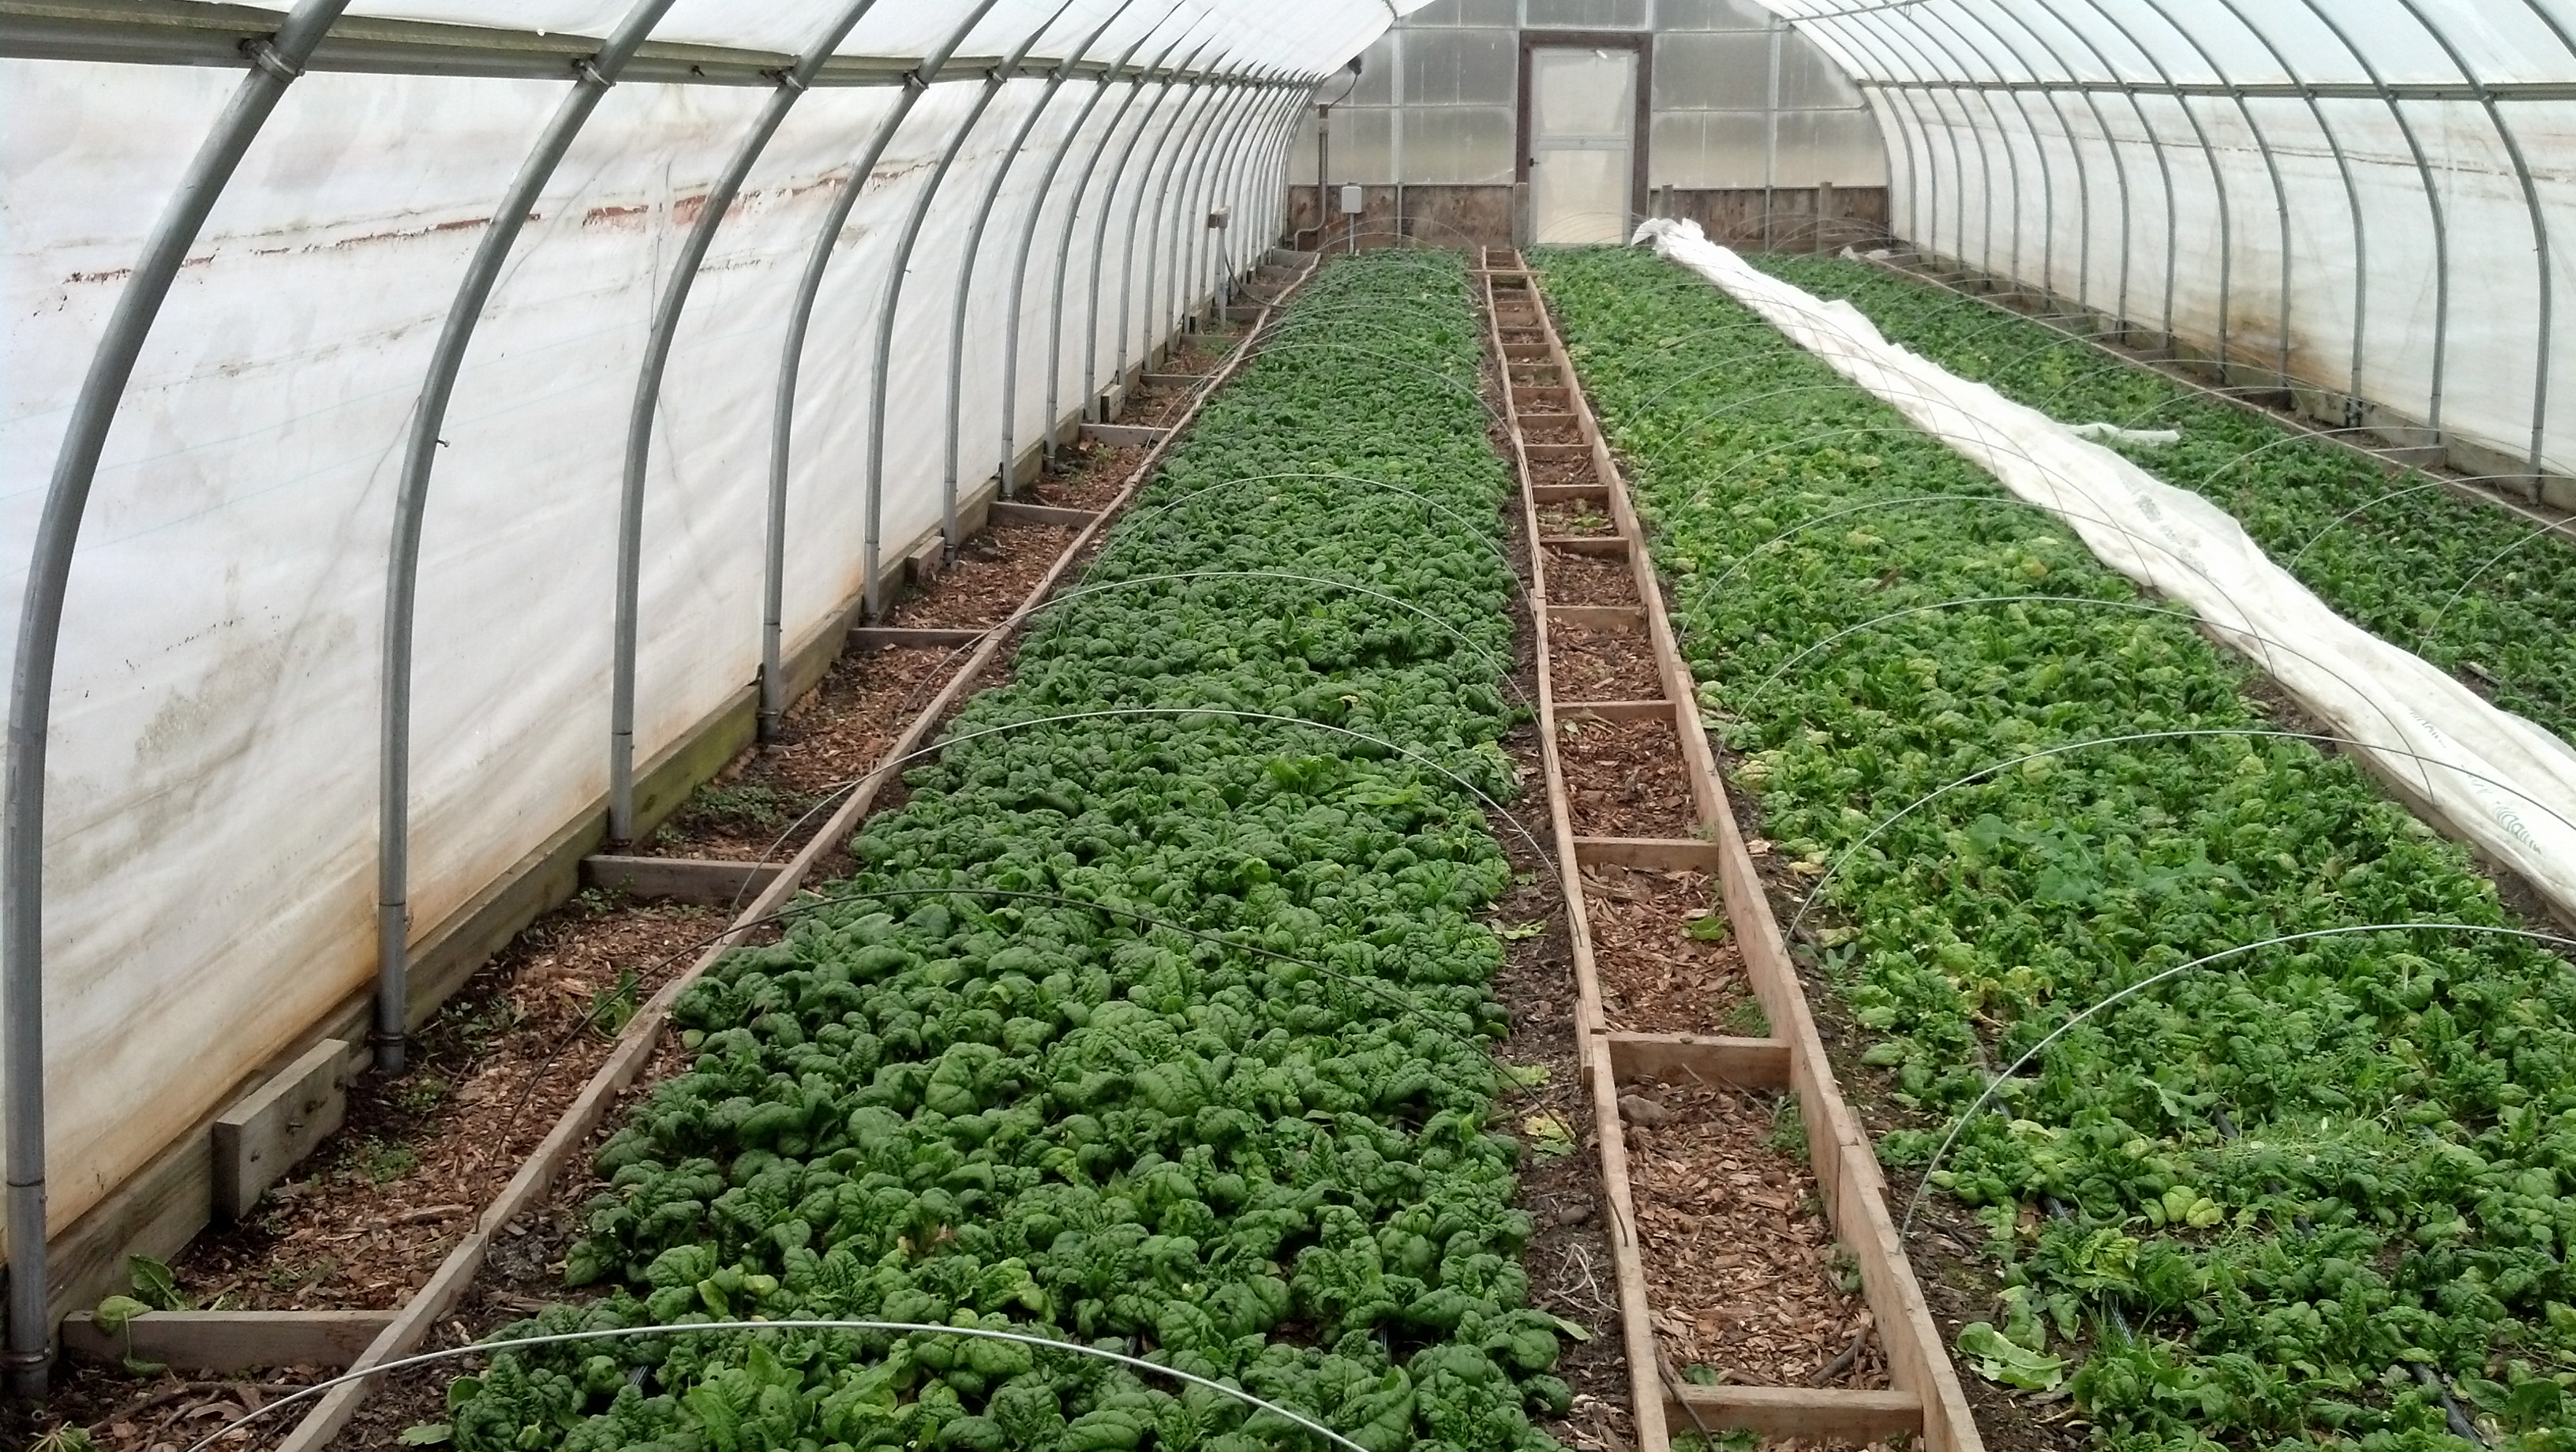 Greenhouse Spinach Grown Without Fertilizer